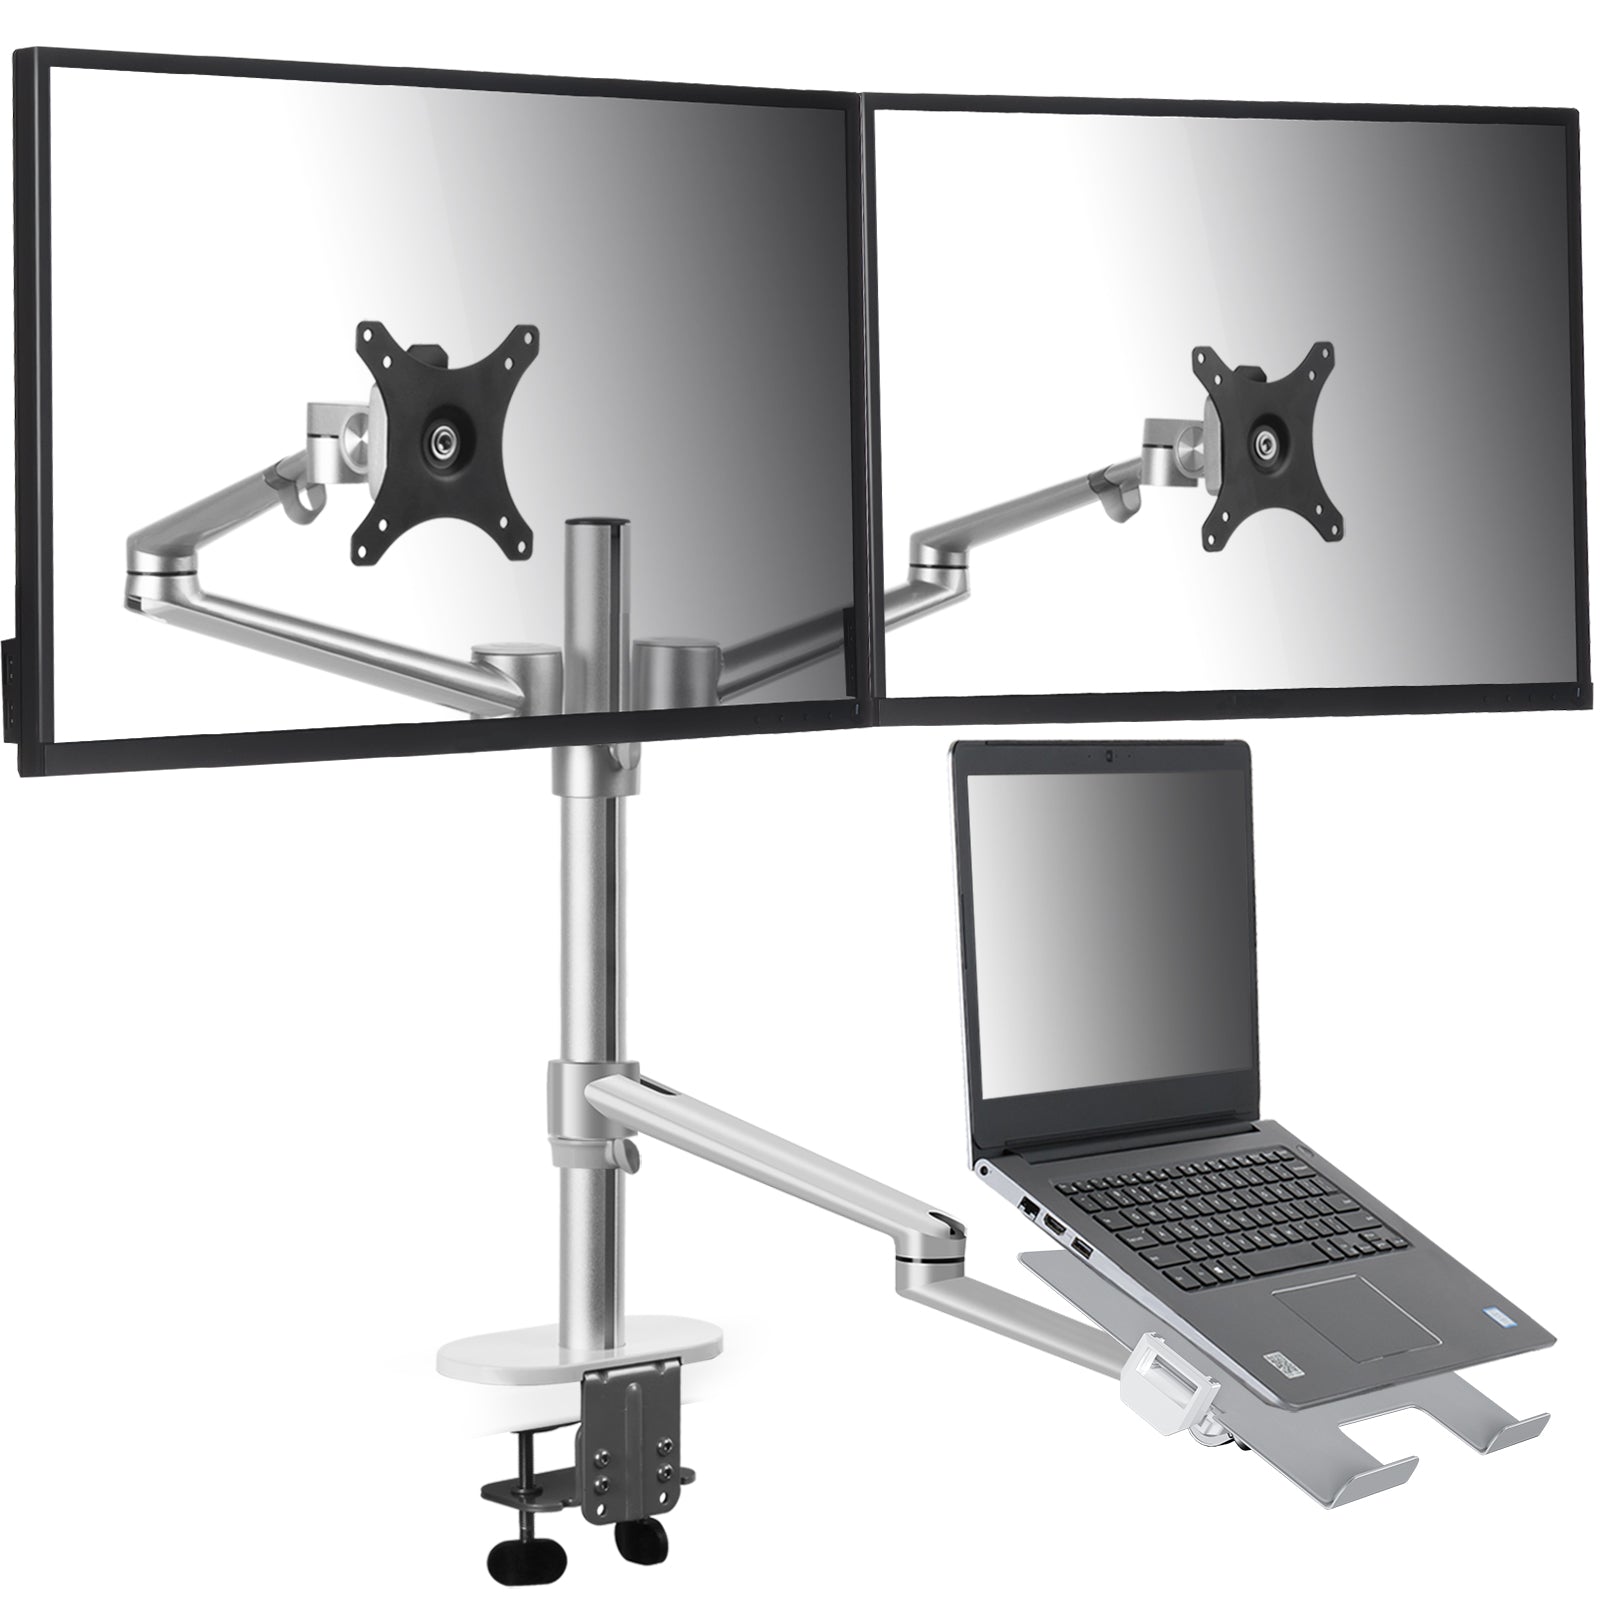 Jual Bracket Monitor & Stand Laptop Dual Arm ALL FOR WORK